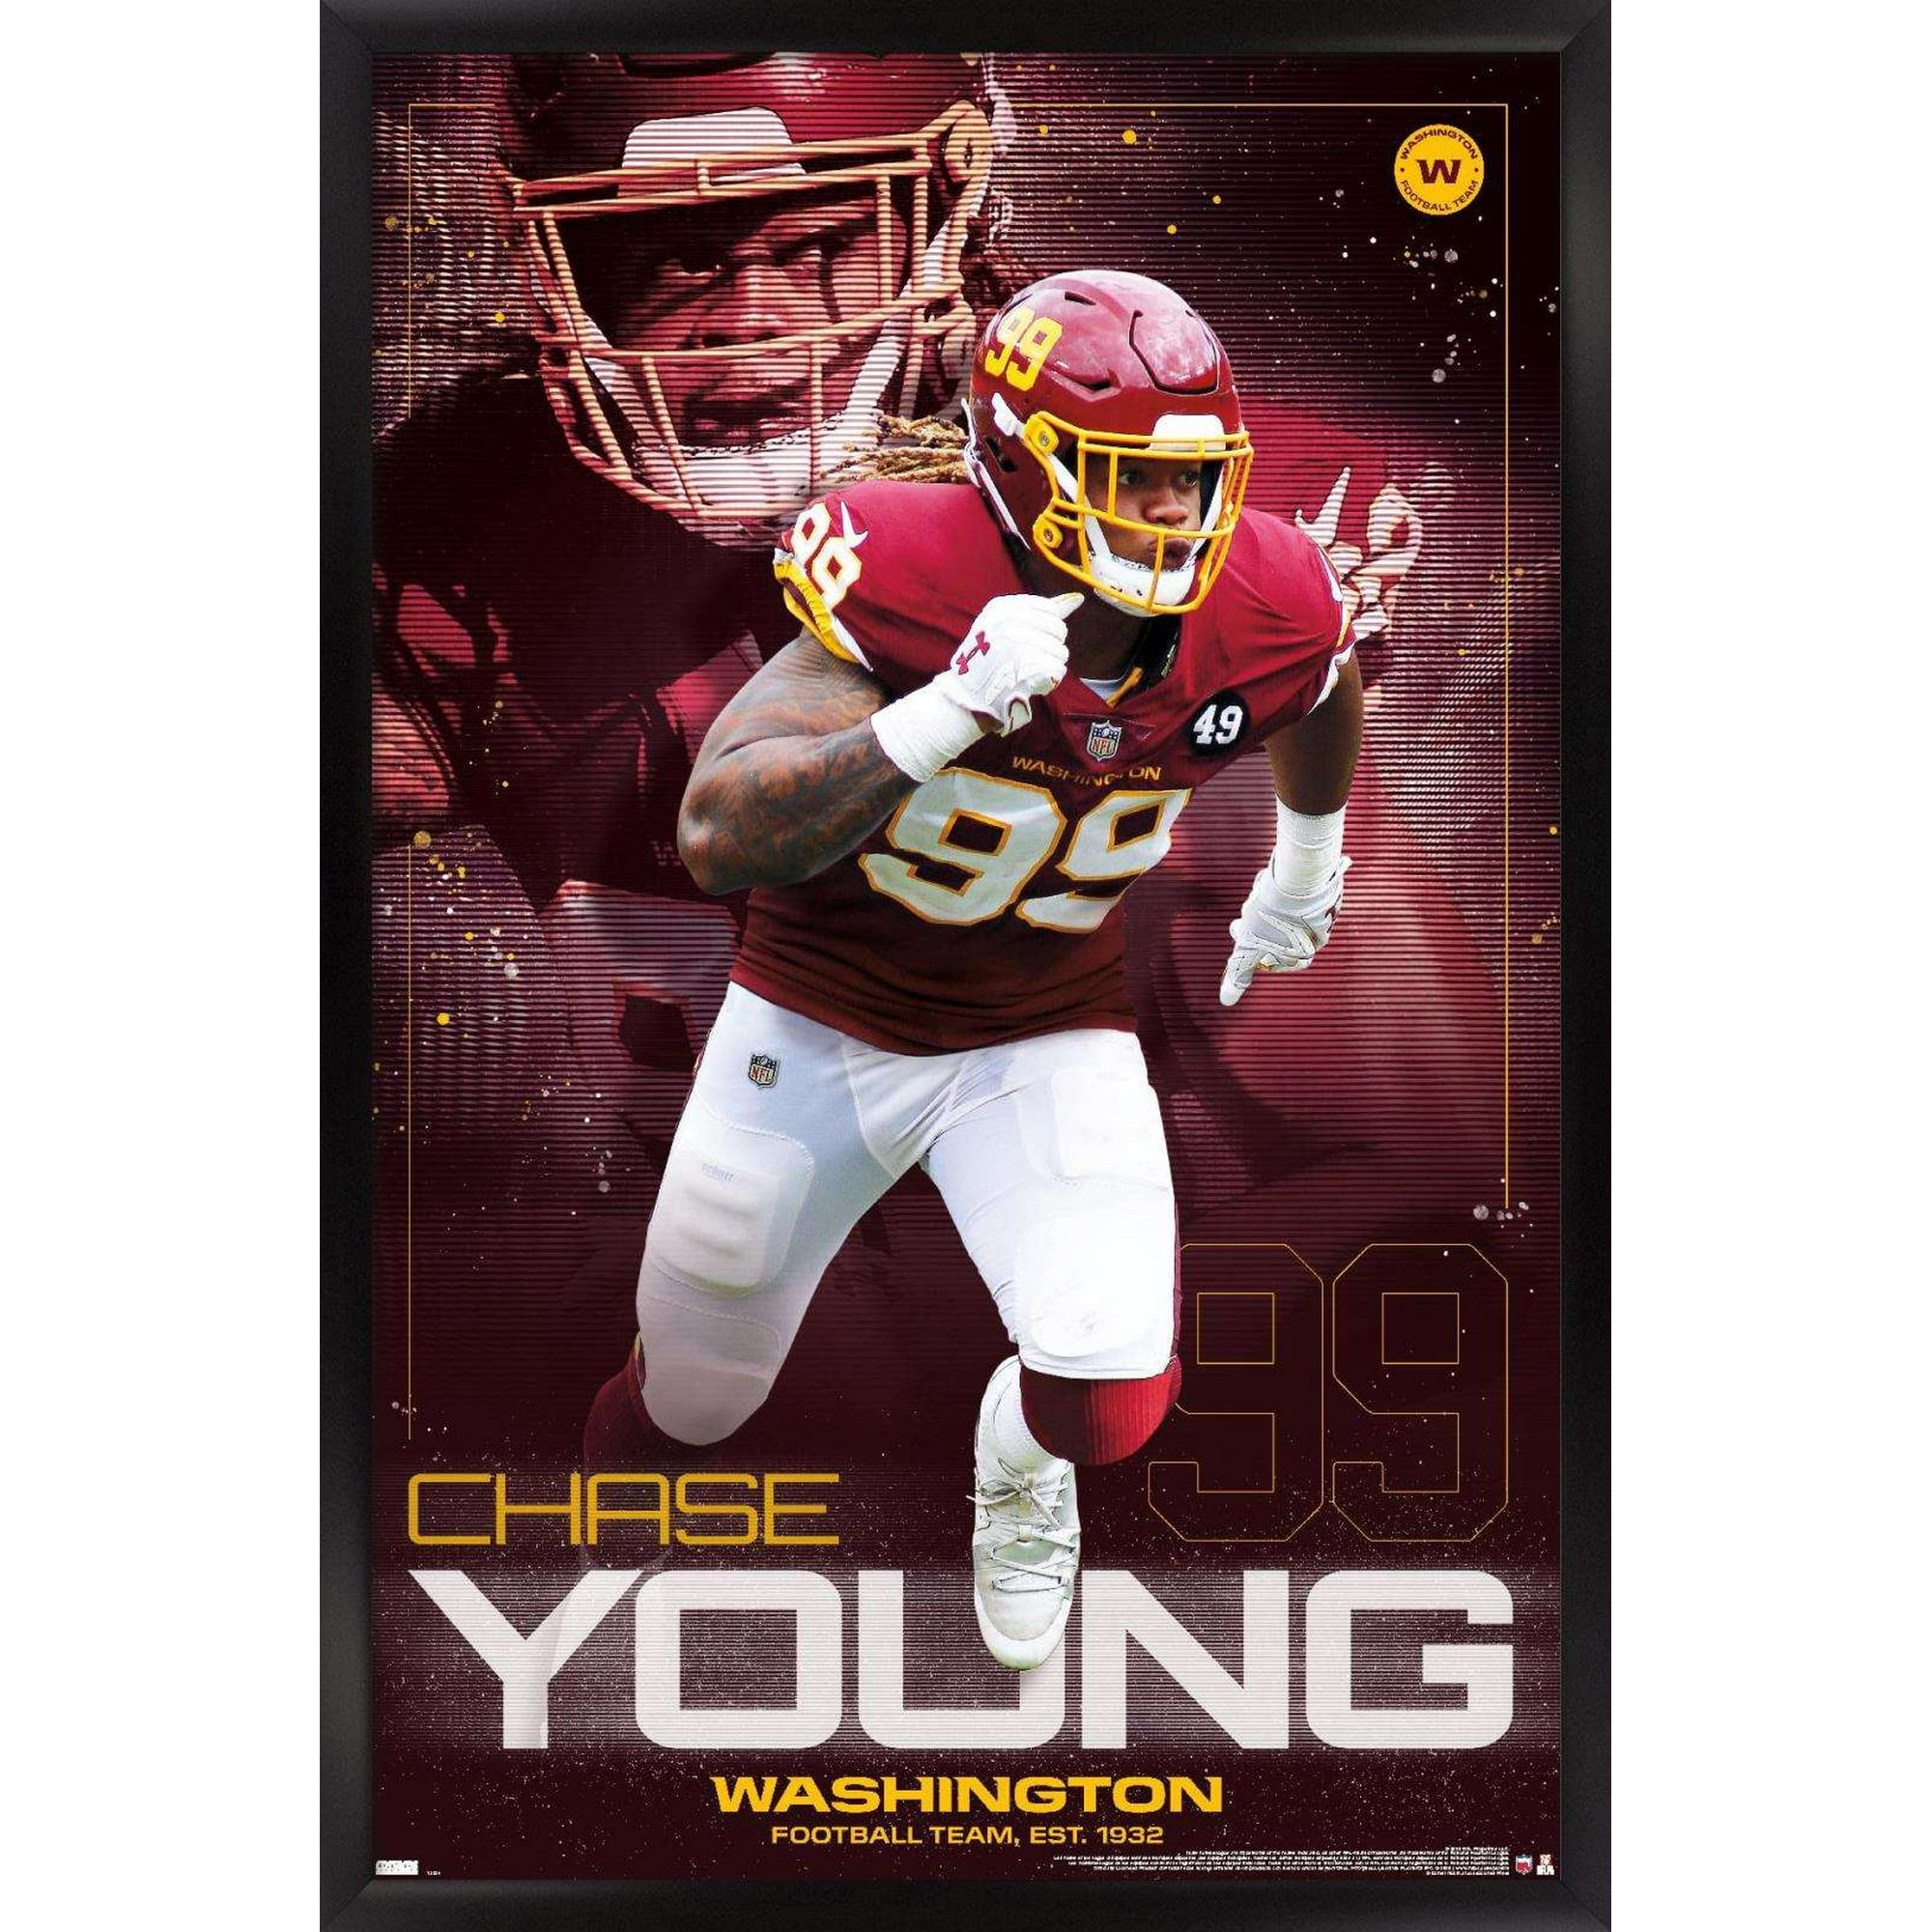 NFL Washington Football Team - Chase Young 20 Wall Poster, 22.375 x 34,  Framed